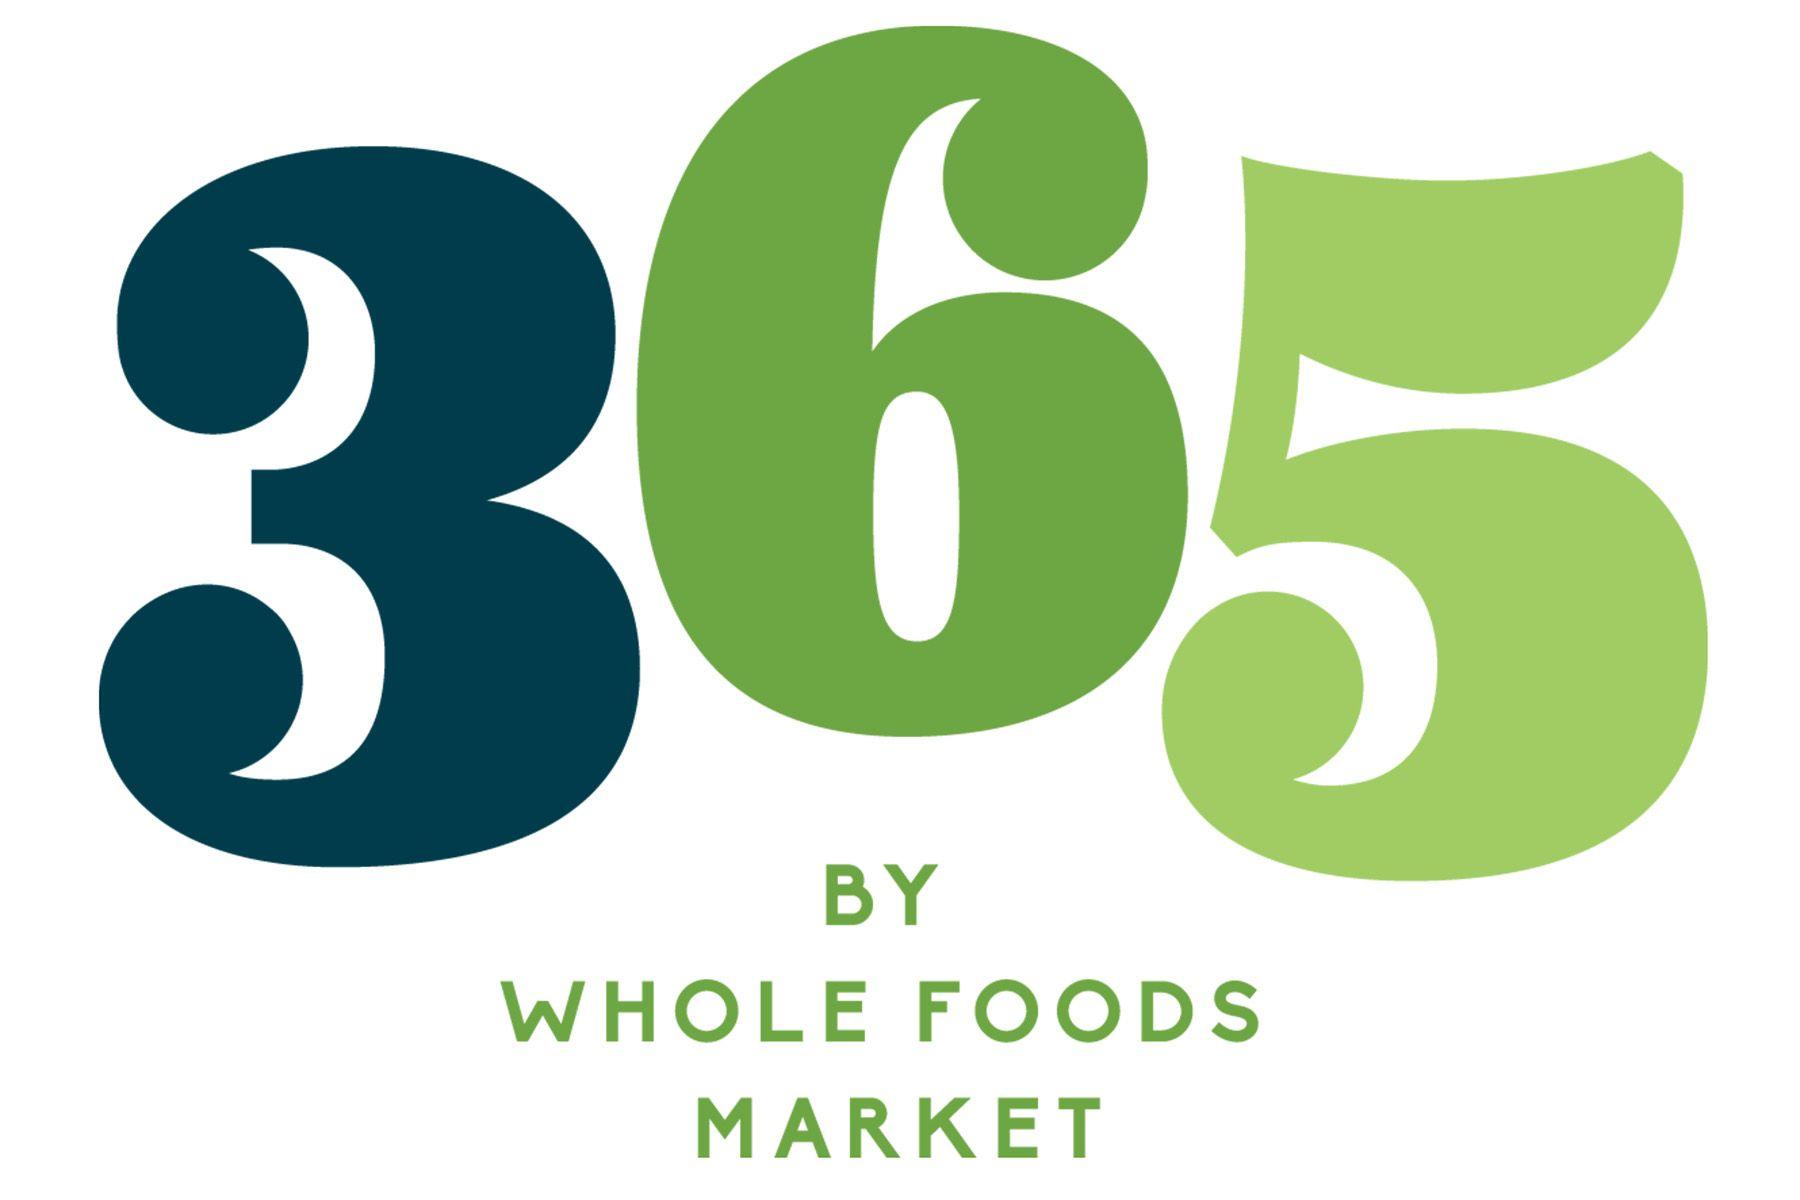 Food Market Logo - Whole Foods To Call New Lower Priced Chain 365 After Its Private